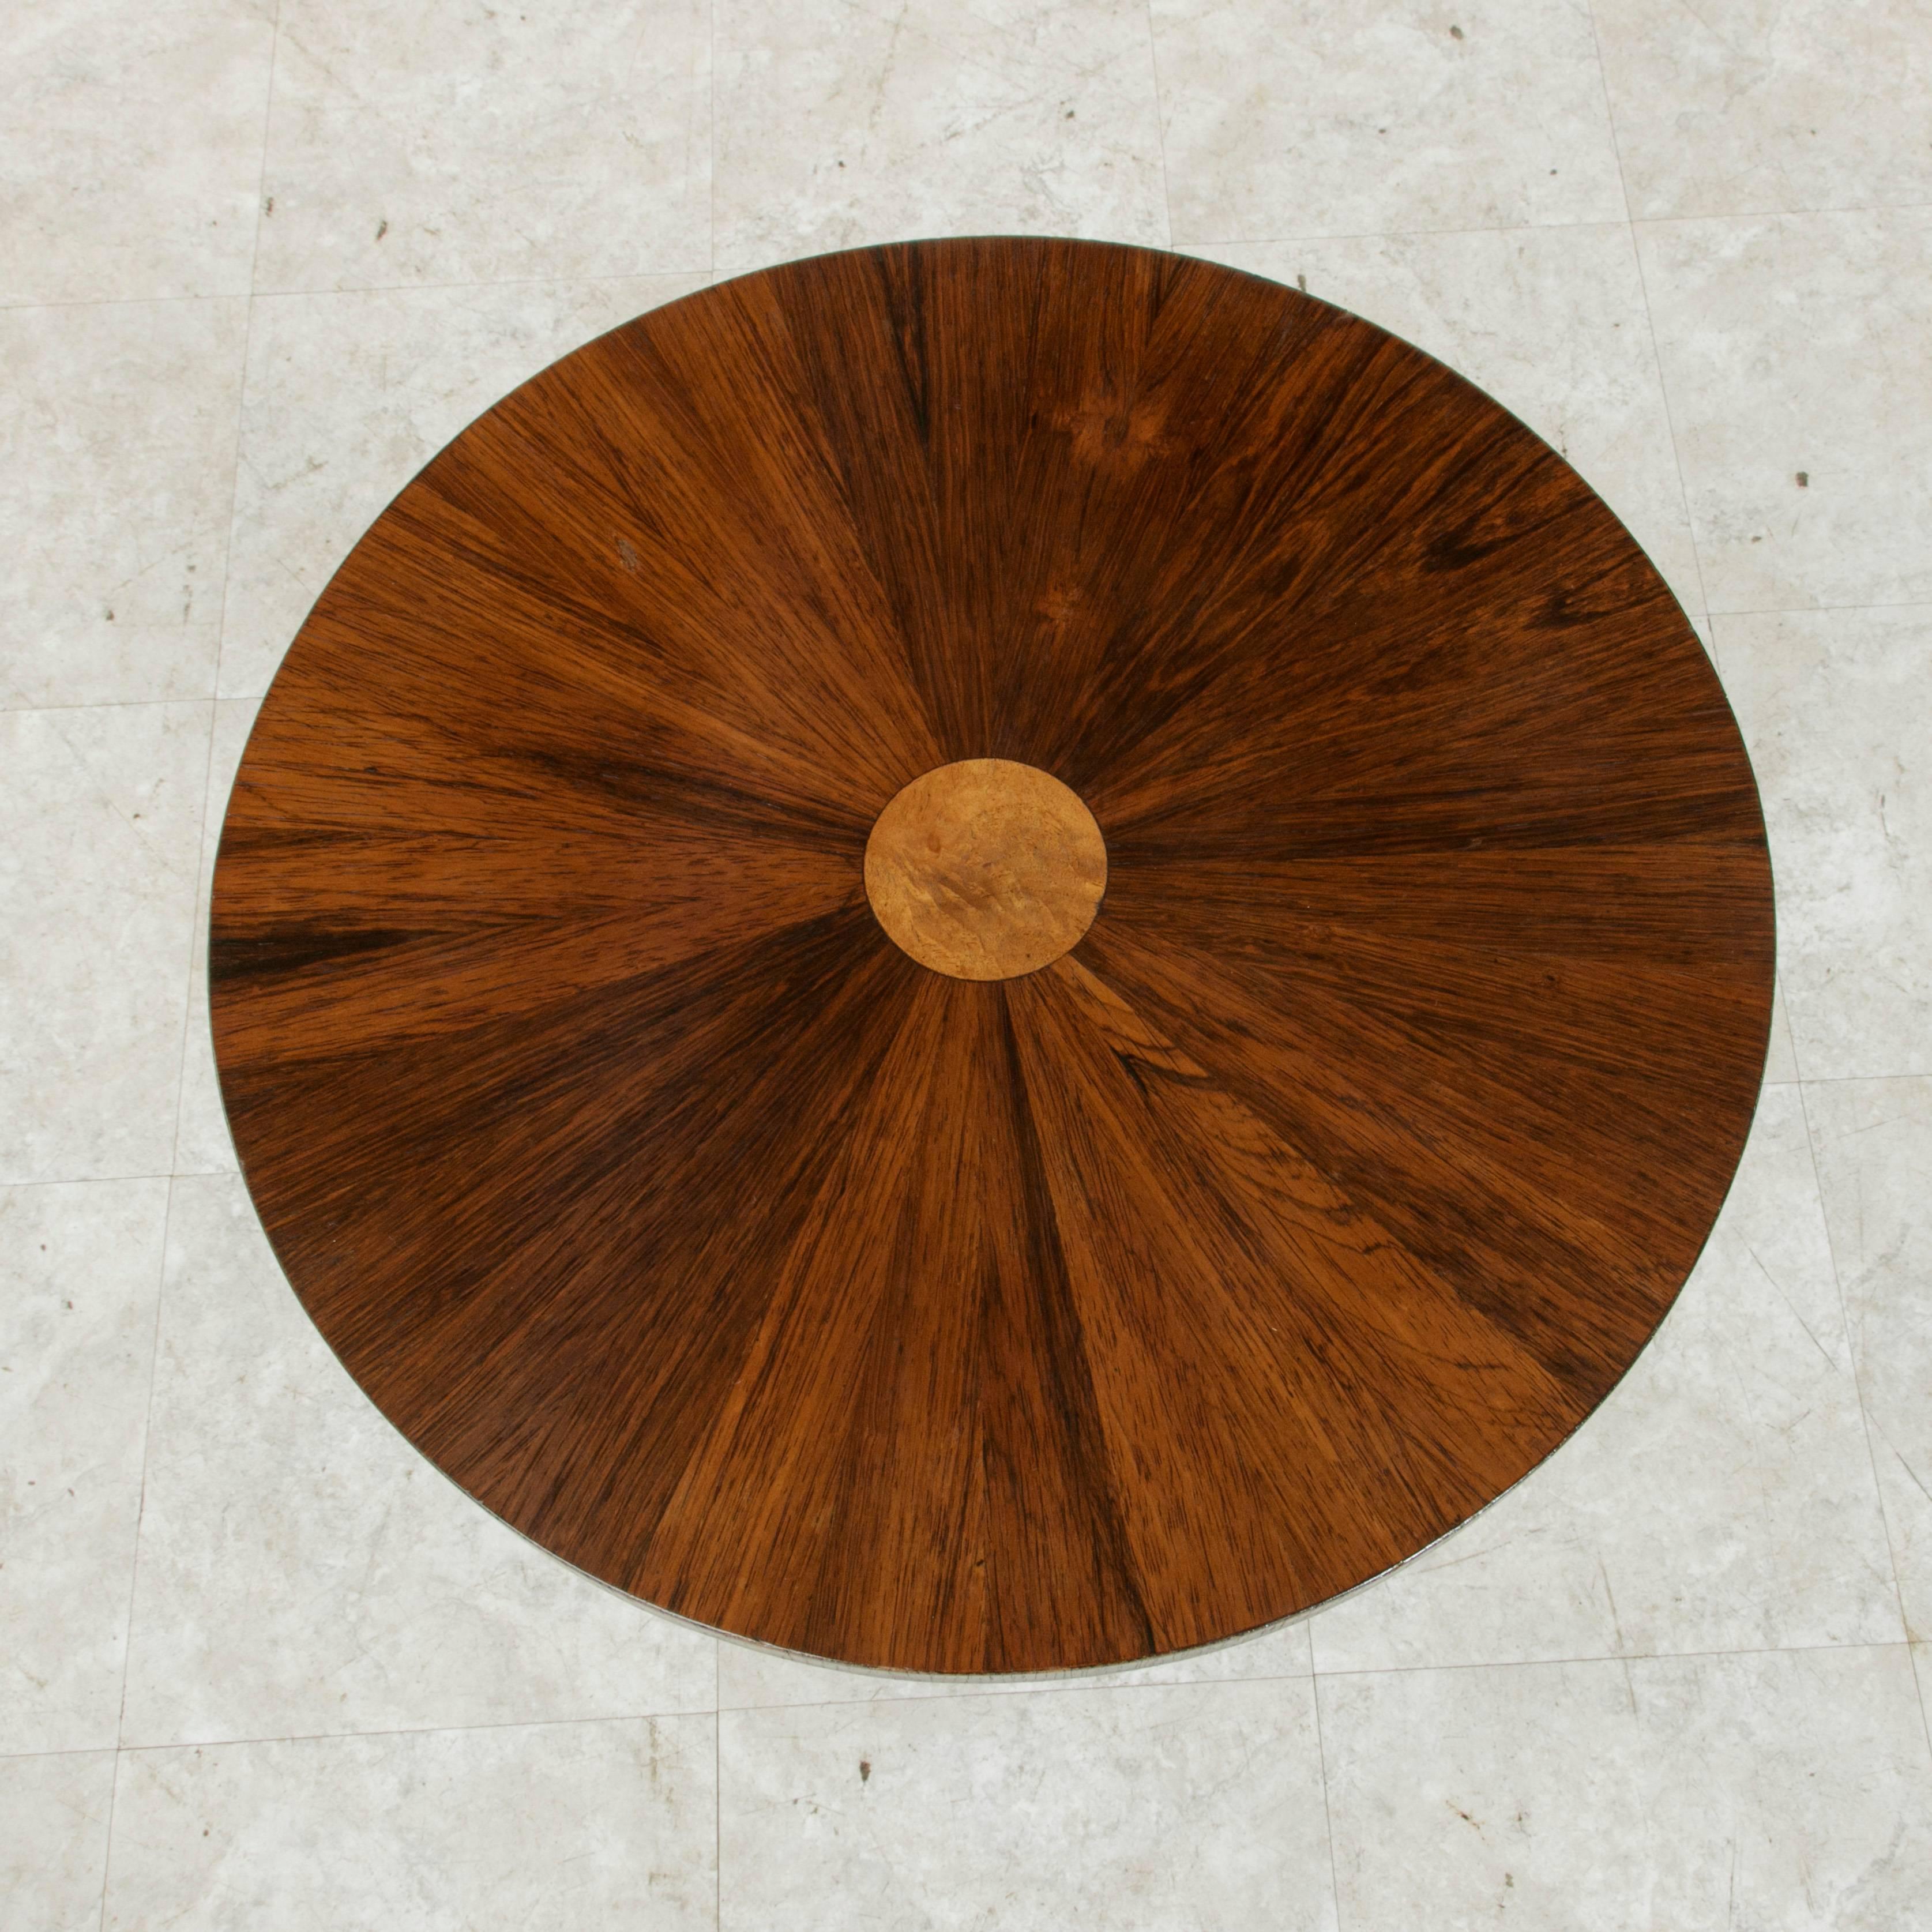 This early 20th century gueridon from the French Art Deco period features a palisander sunburst top with a central inlaid circle of burl walnut. The top is mounted on a unique four tiered pillar supported by a circular base. With its simple refined